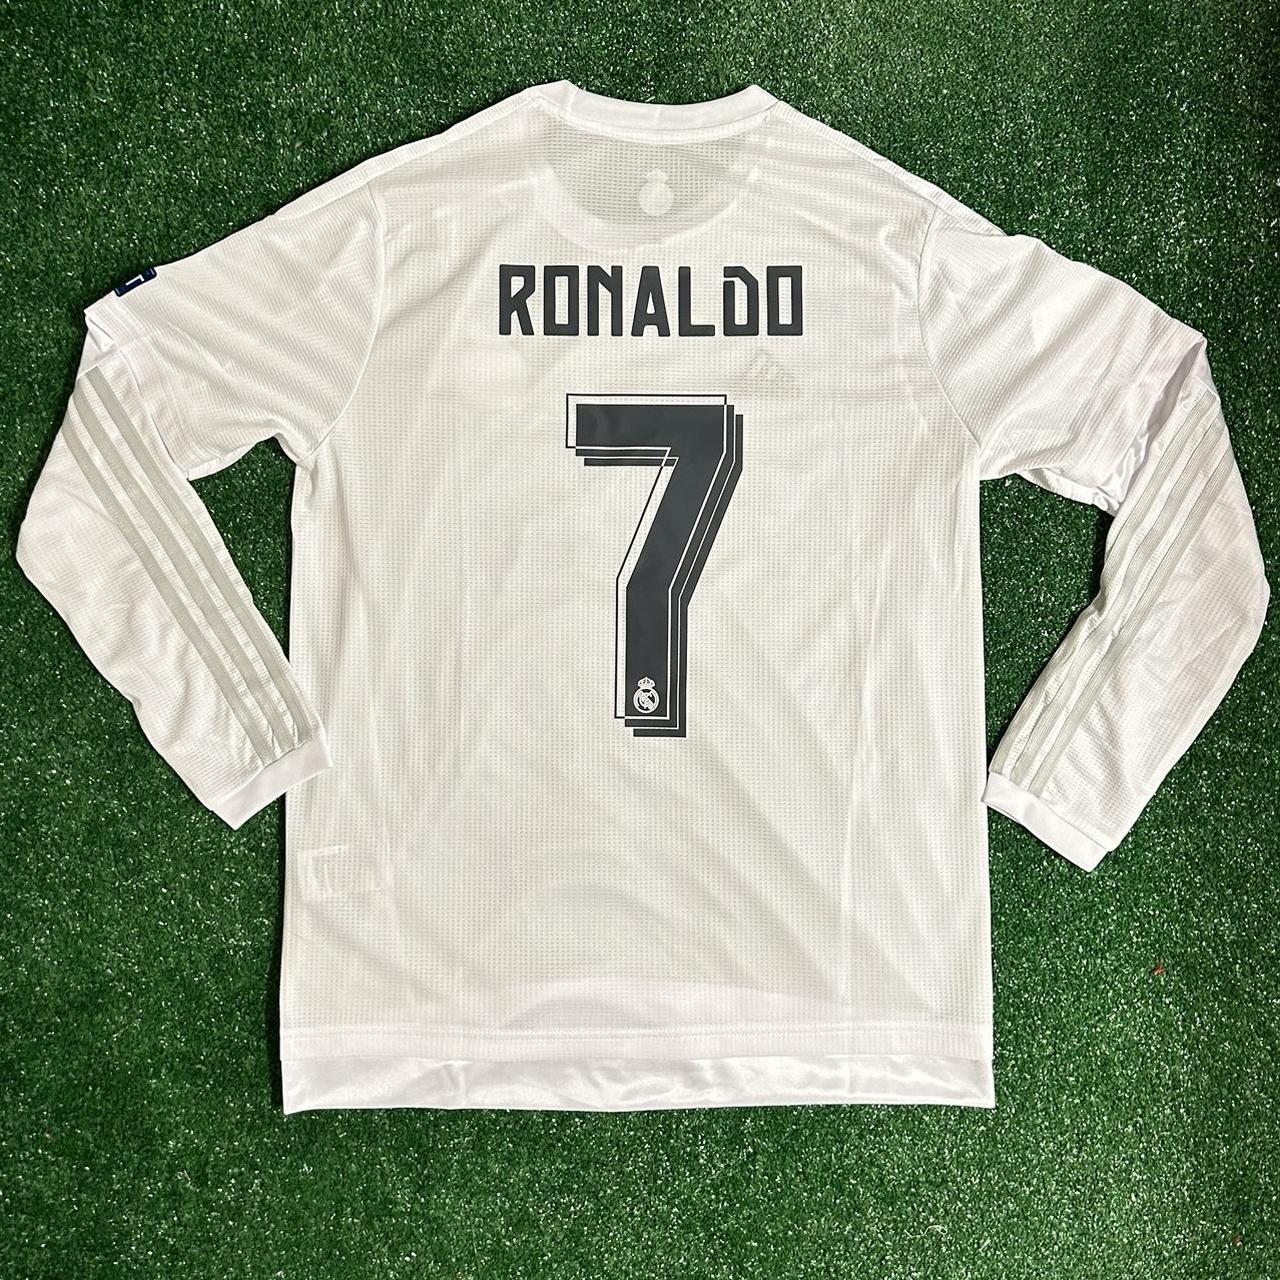 Real Madrid Home Jersey 15/16 Cr7 Size - Large Fast... - Depop